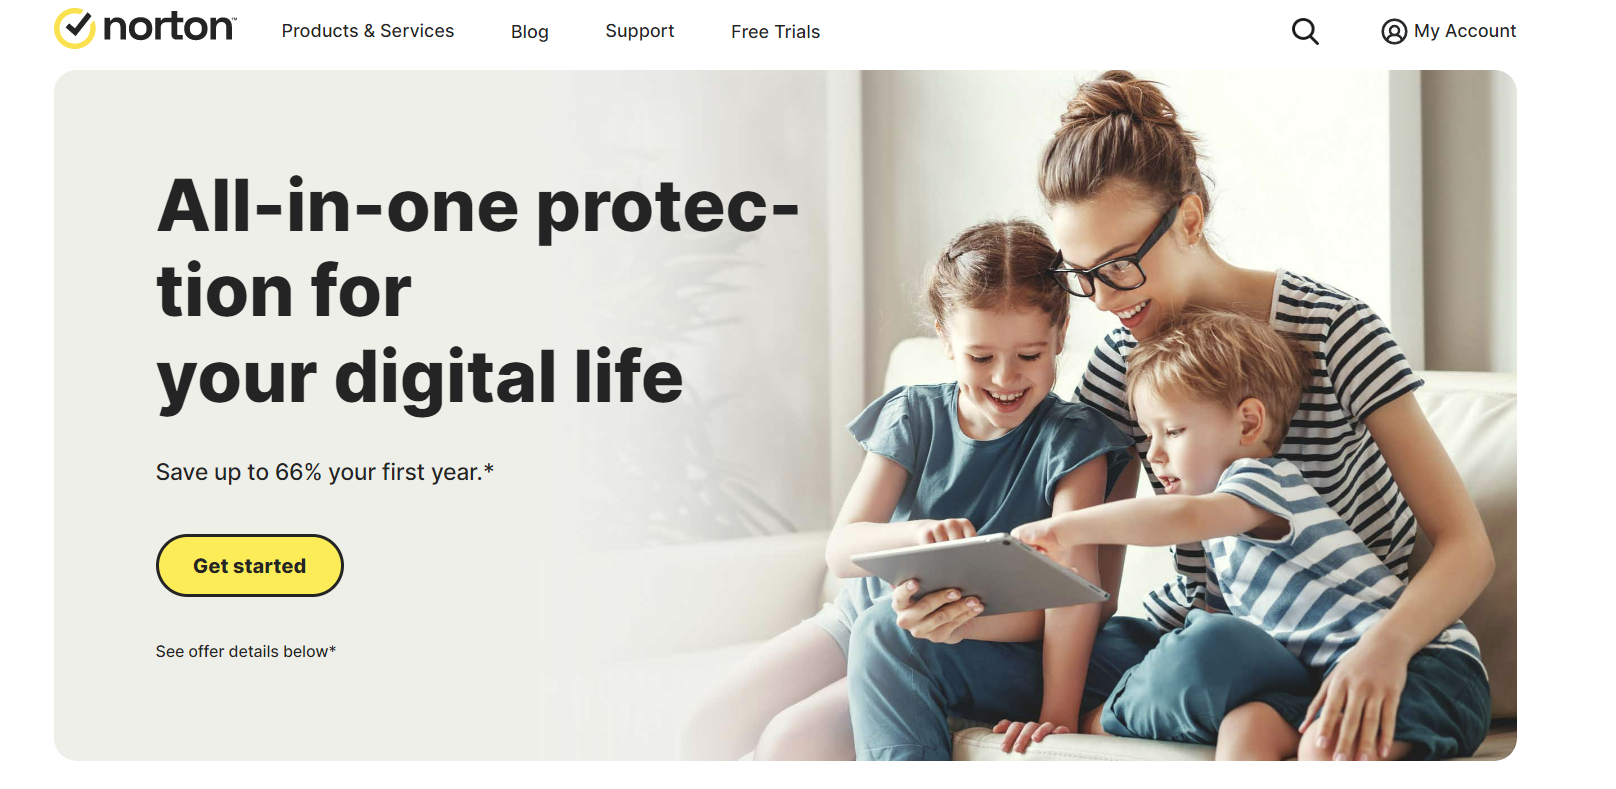 Norton Family equips parents with tools to monitor their children's internet activity and help them stay safe and focused.